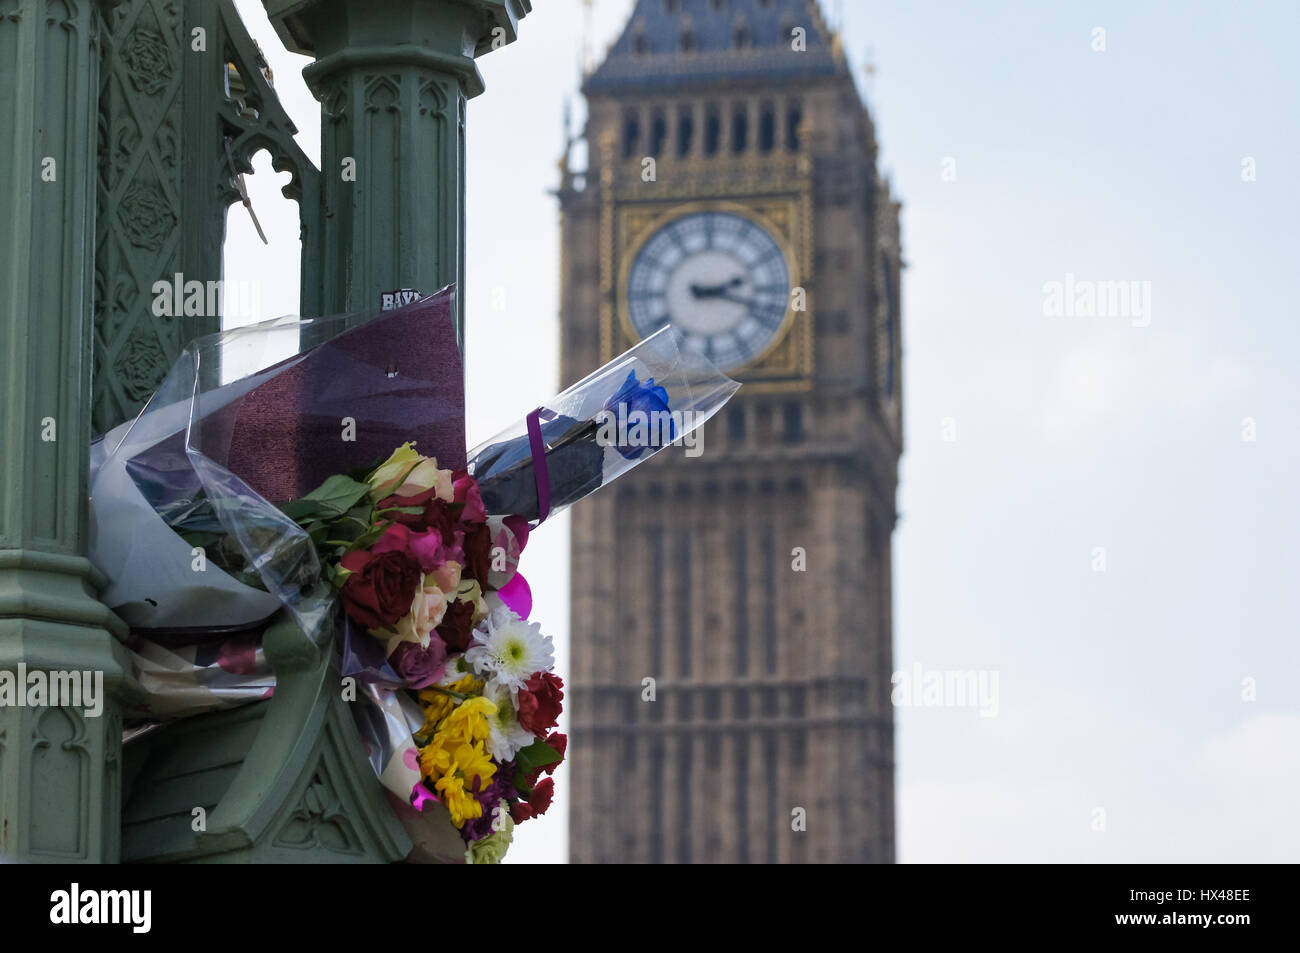 London, UK. 24th March, 2017. Floral tributes to the victims on Westminster Bridge after the terrorist attack. Credit: Marcin Rogozinski/Alamy Live News Stock Photo